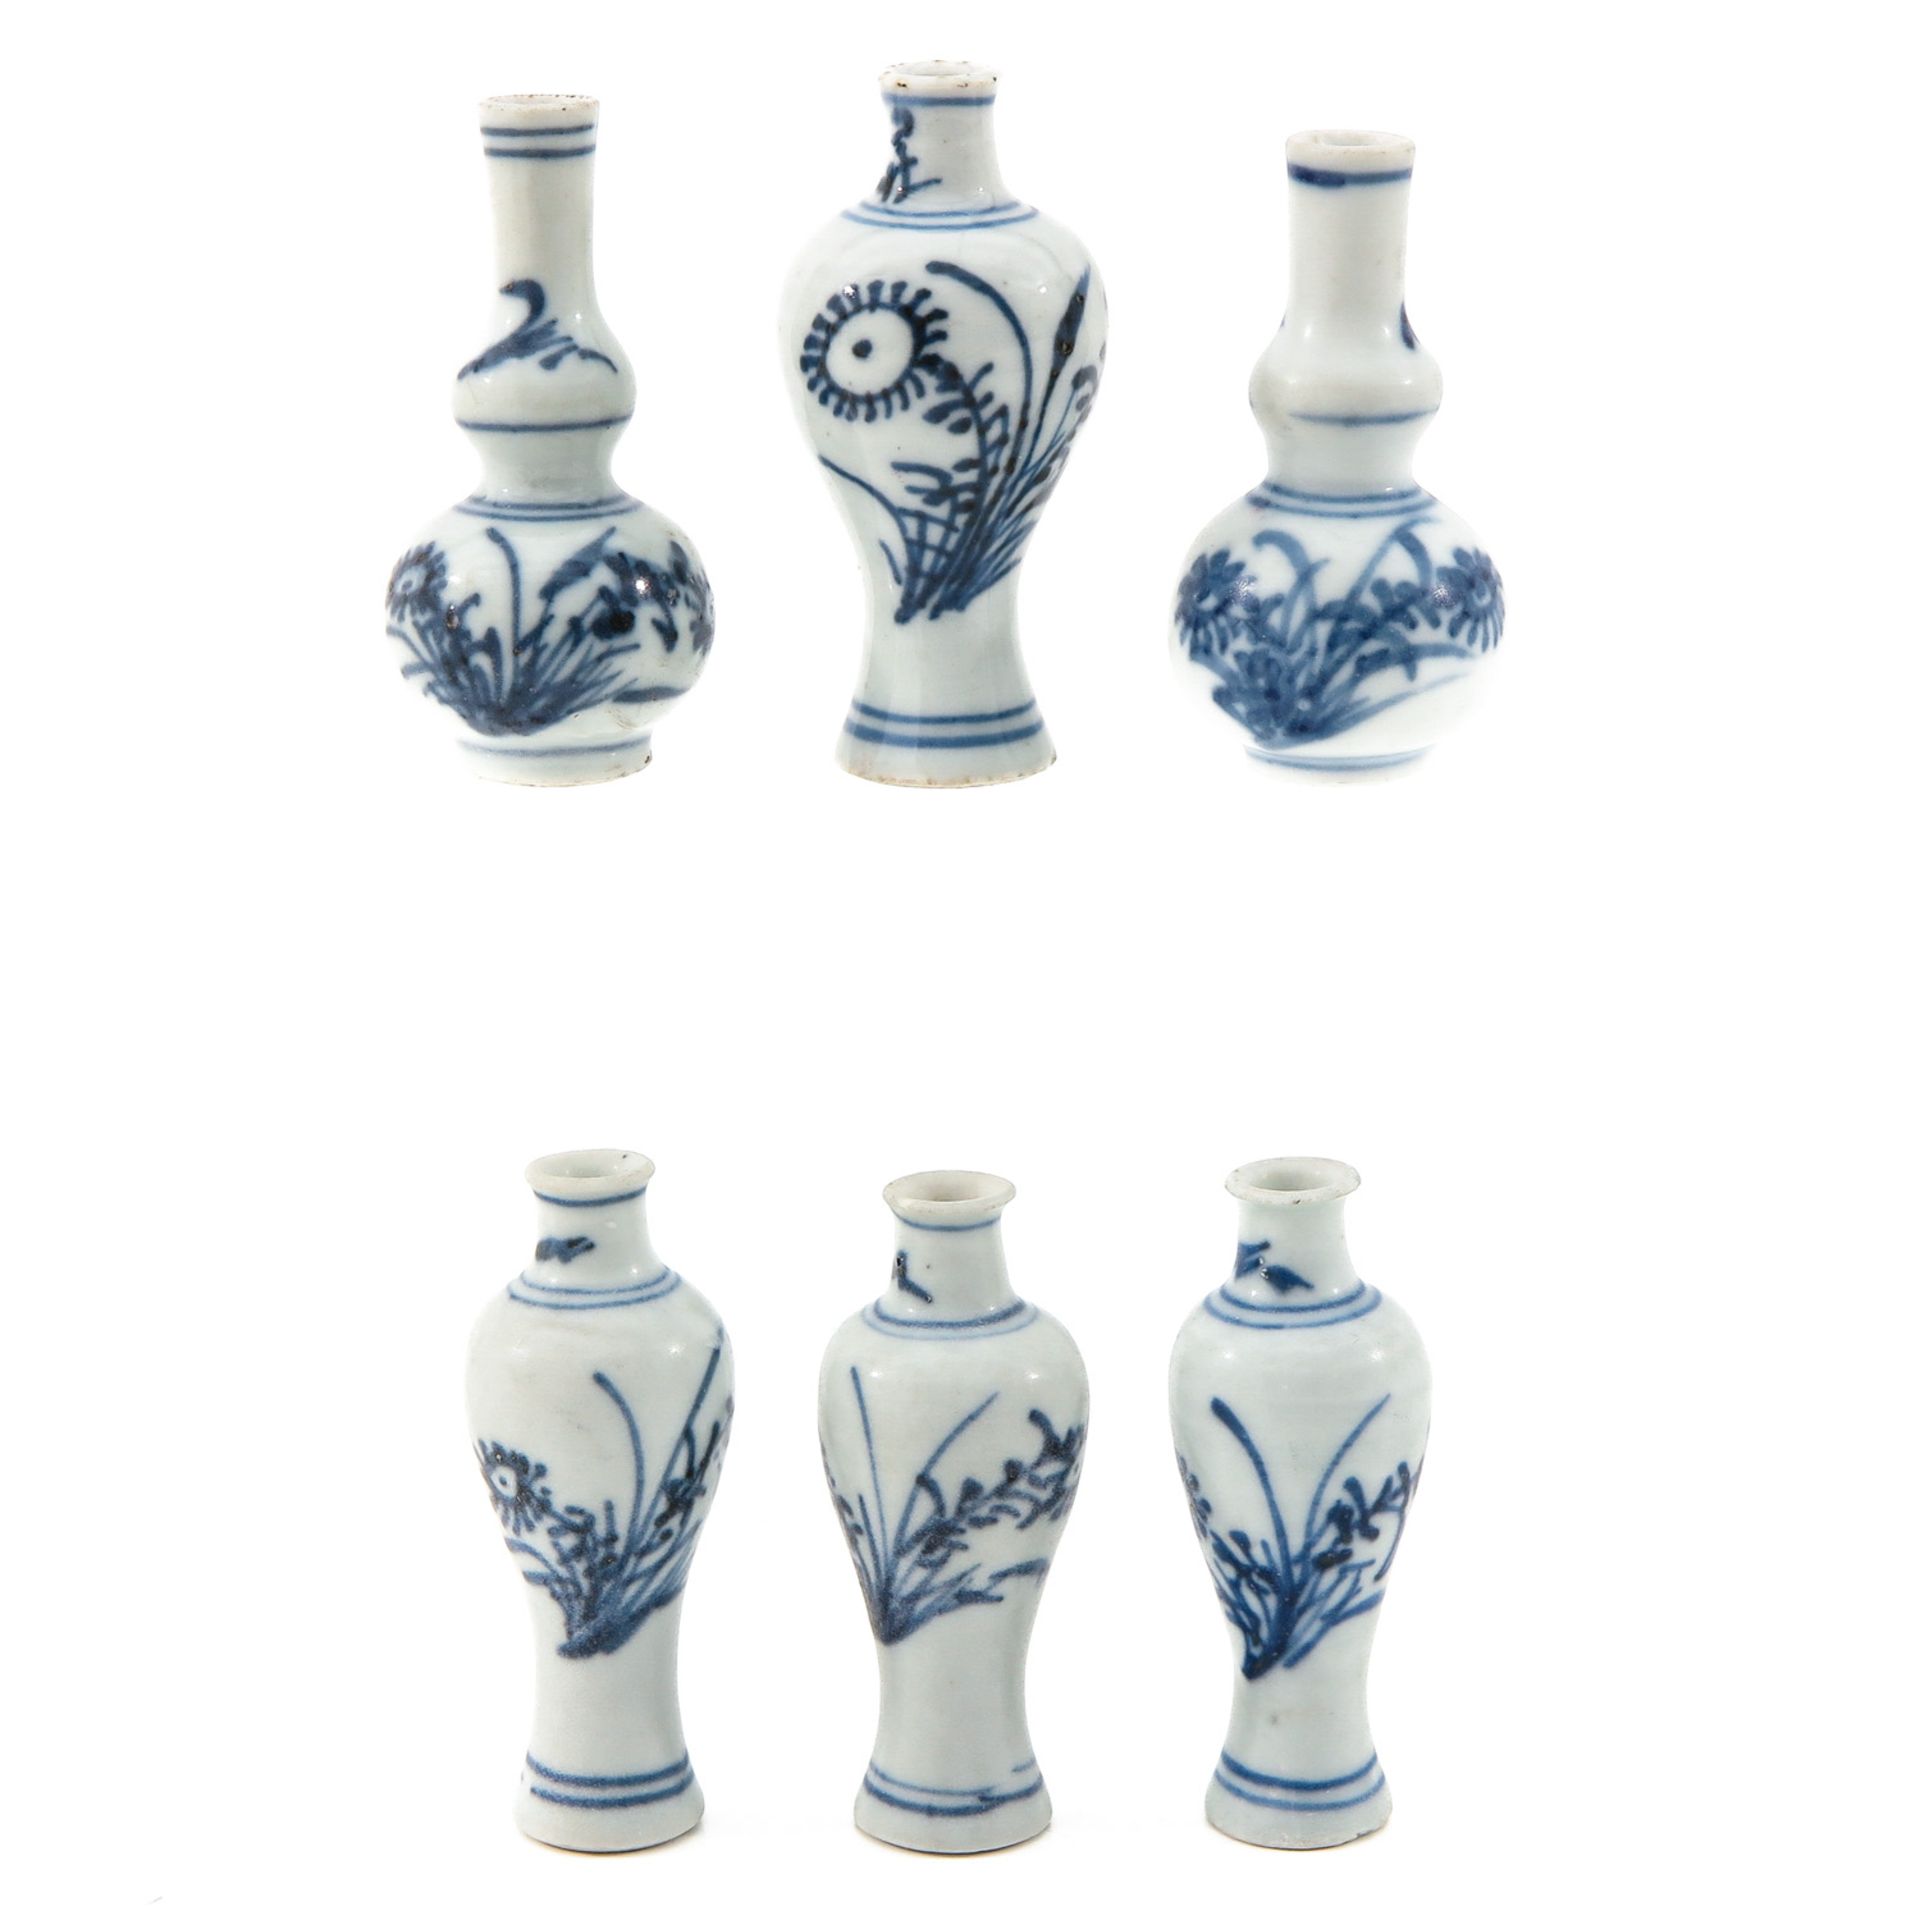 A Collection of 6 Miniature Vases